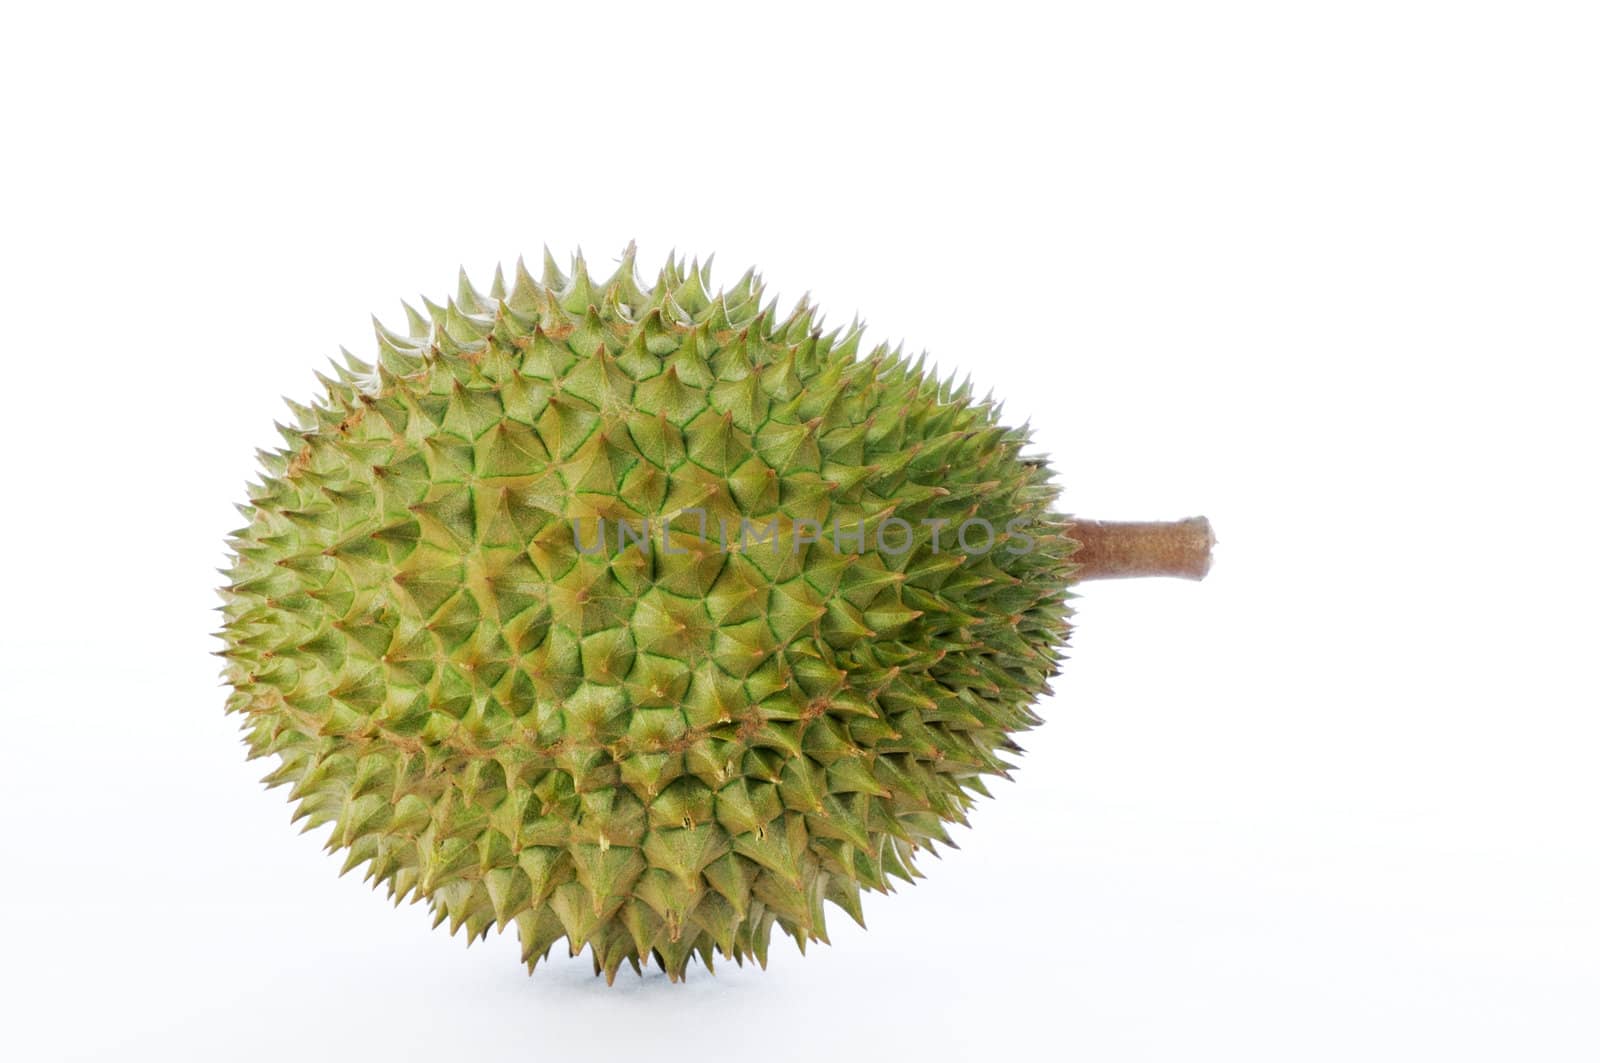 Durian, the king of fruits from South East Asia on white background.